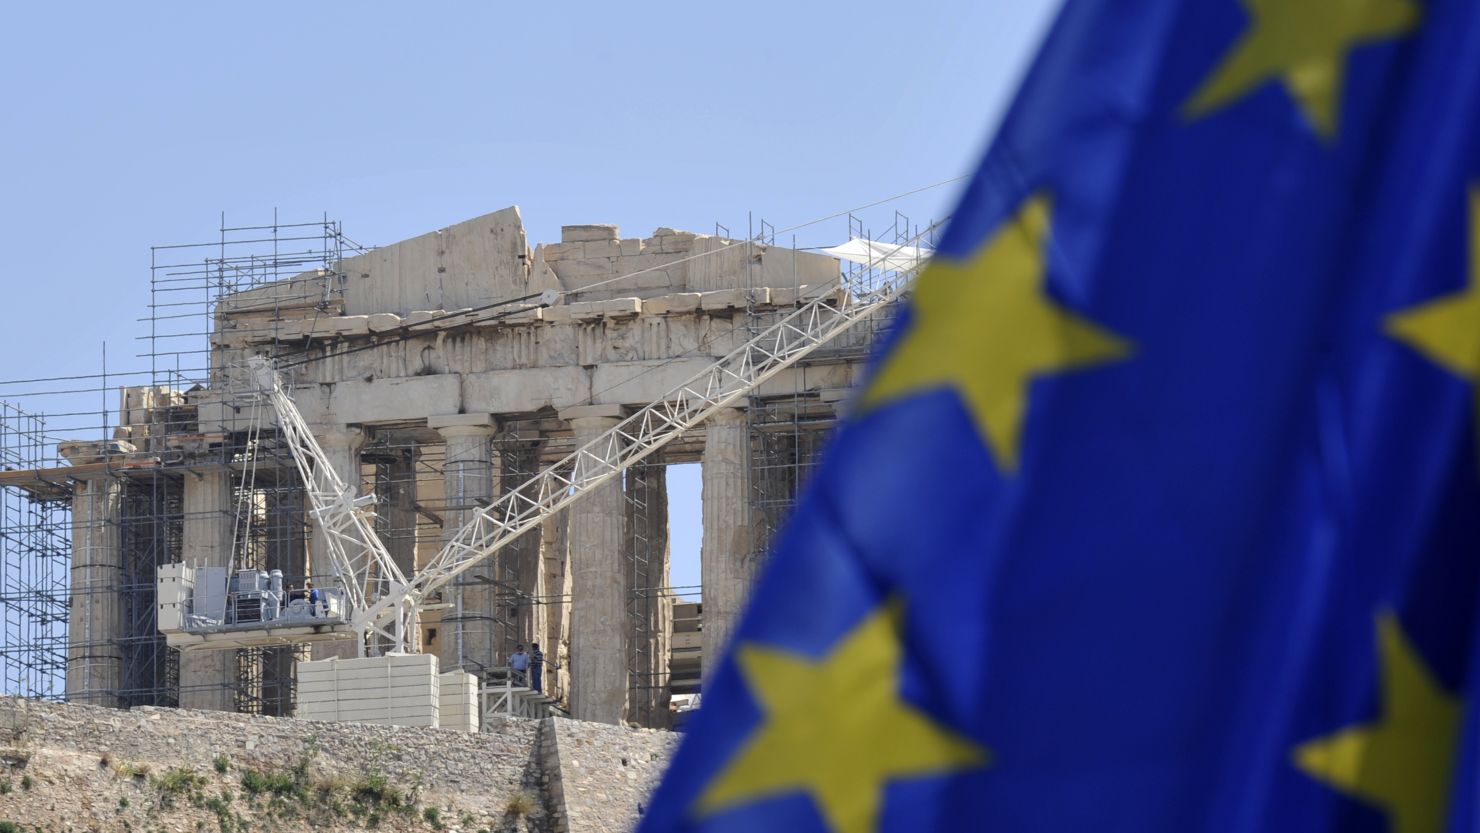 An EU flag flies in front of the Acropolis in Athens. A rerun of the Greek elections is scheduled for June 17.